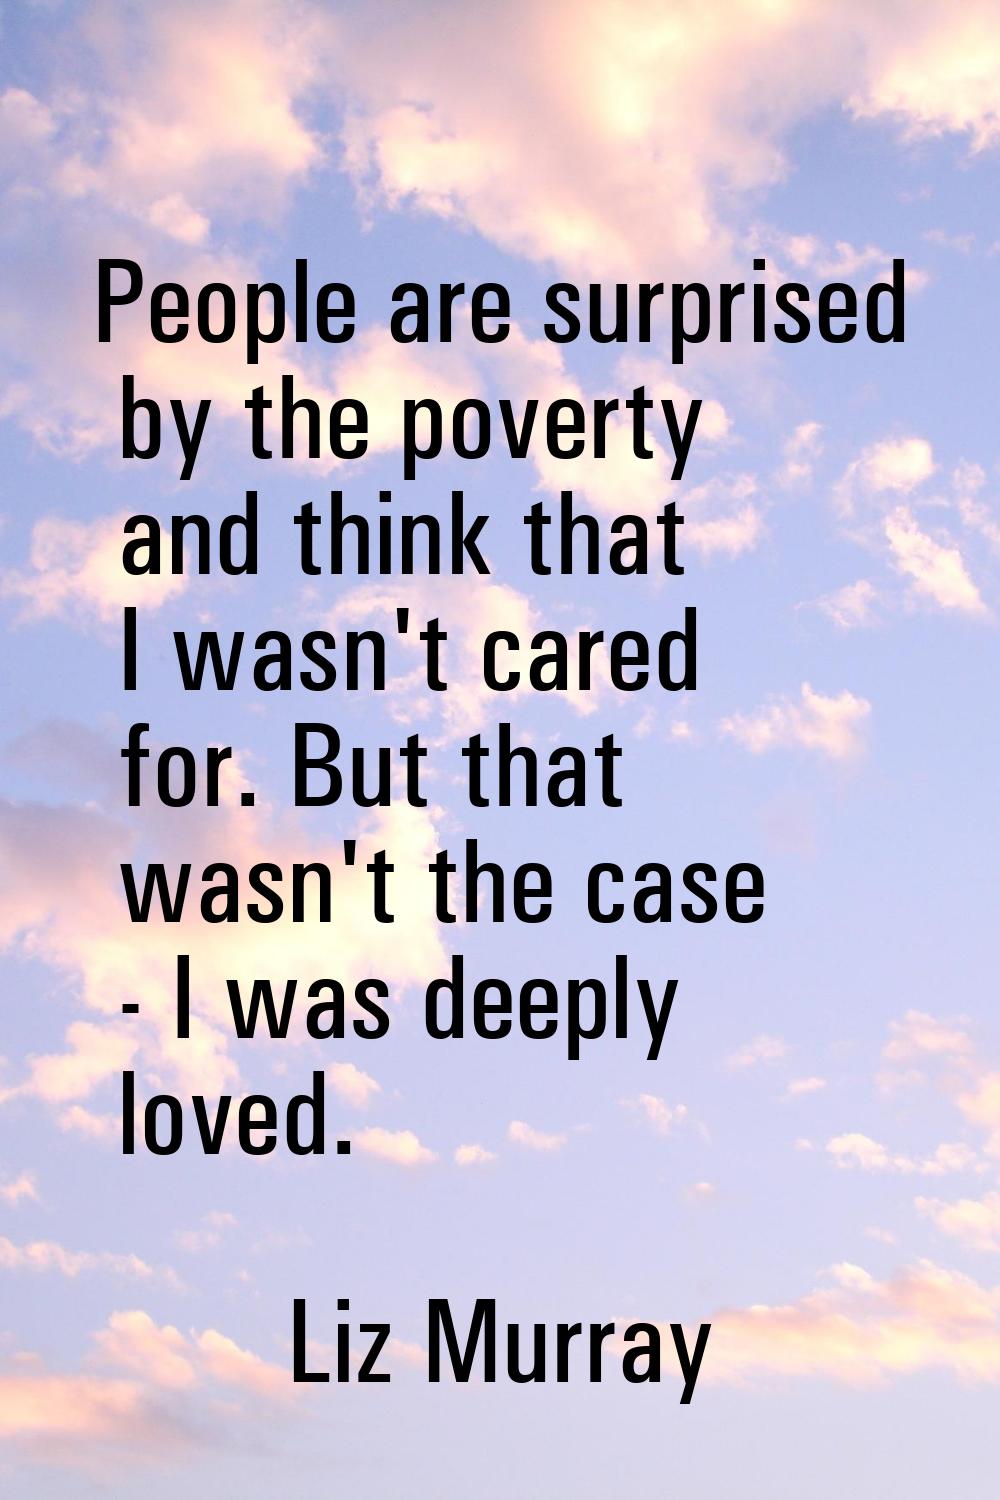 People are surprised by the poverty and think that I wasn't cared for. But that wasn't the case - I